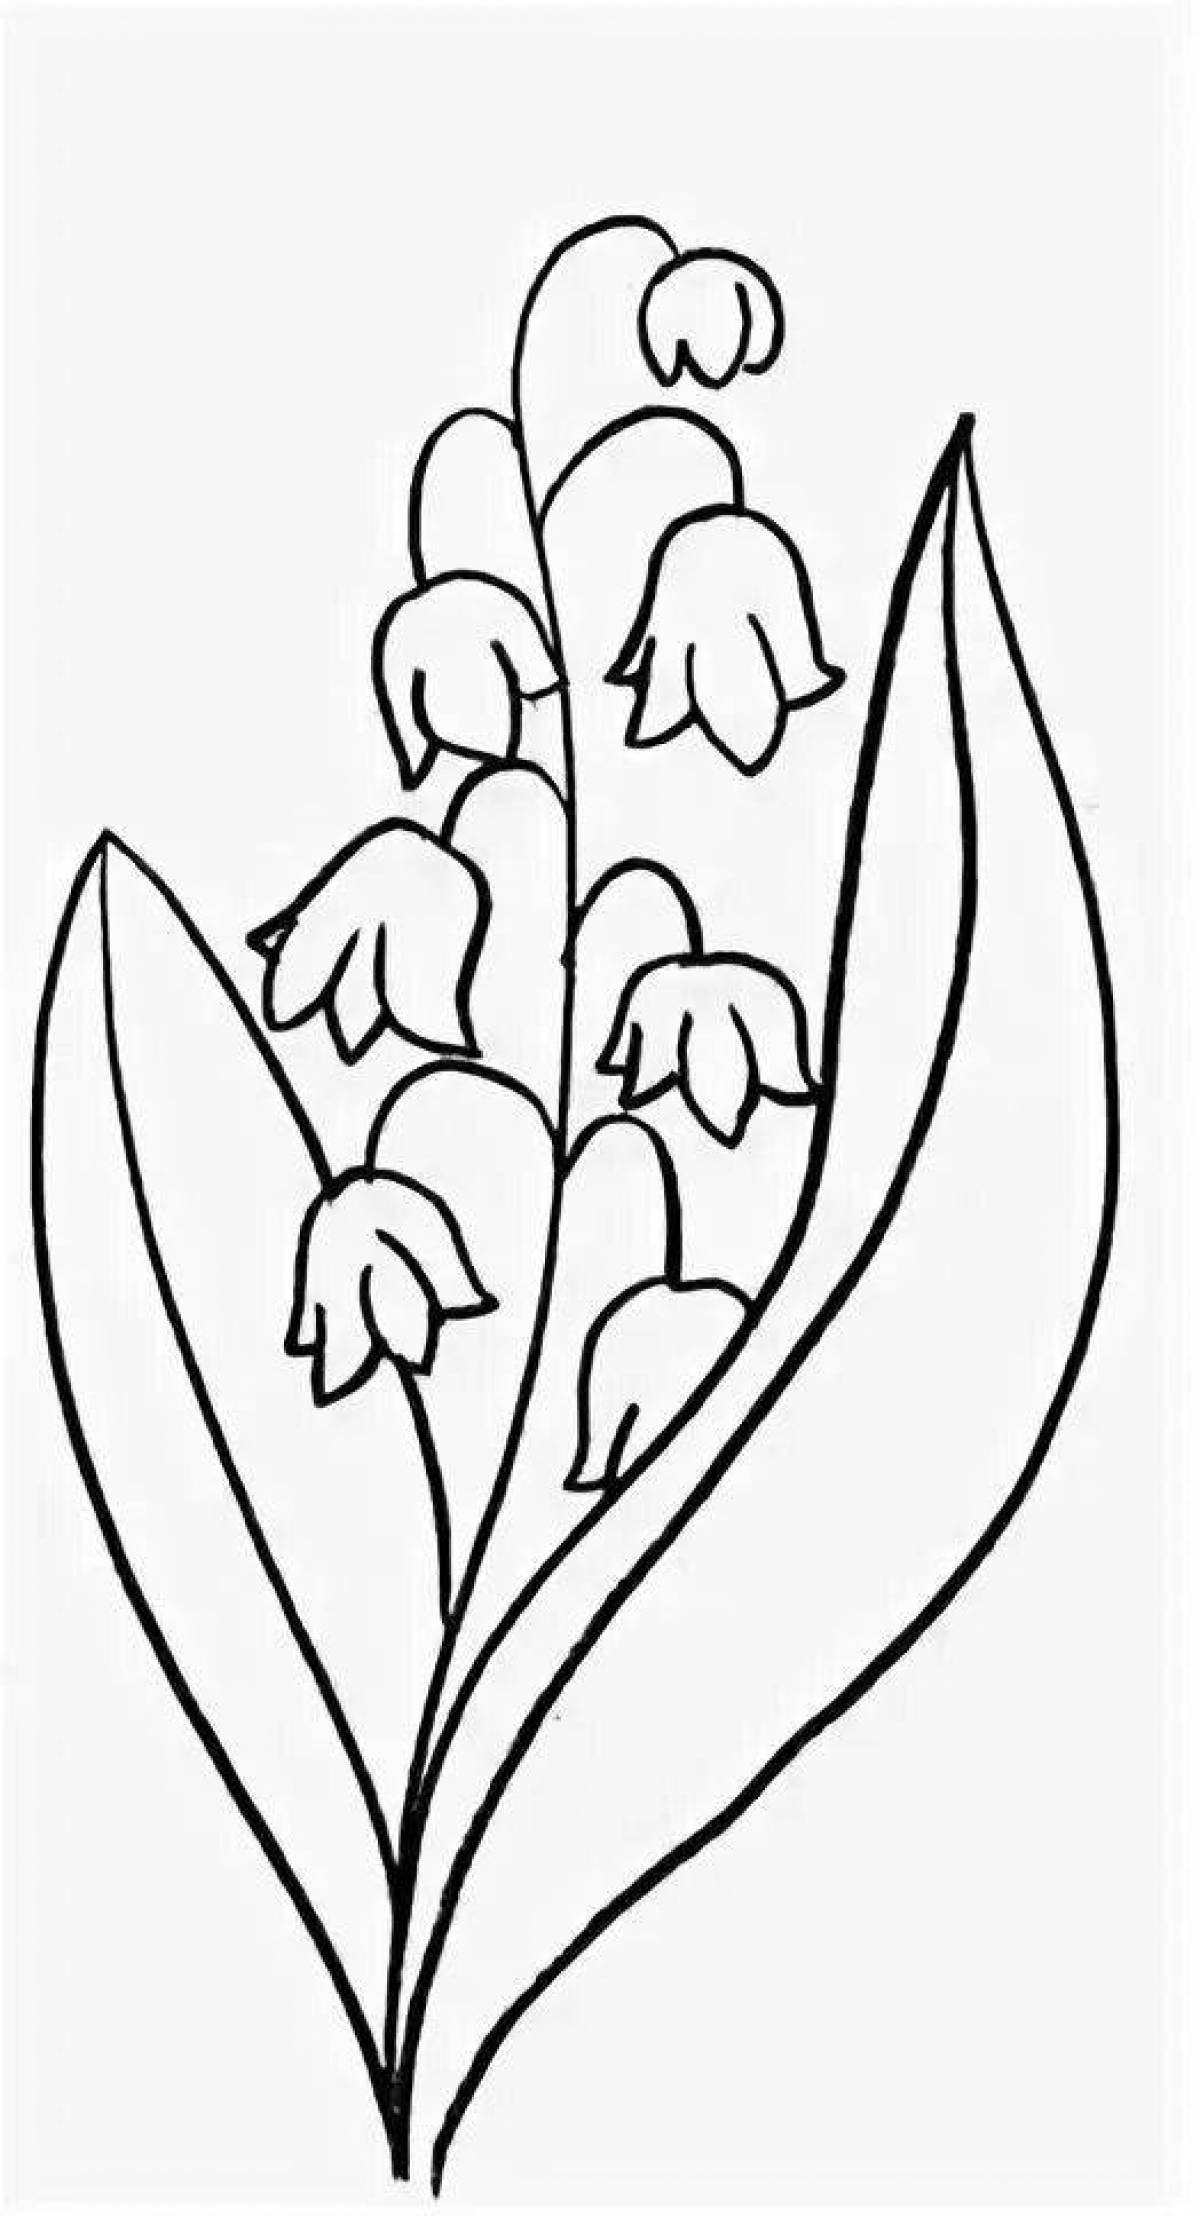 Lily of the valley holiday coloring book for kids